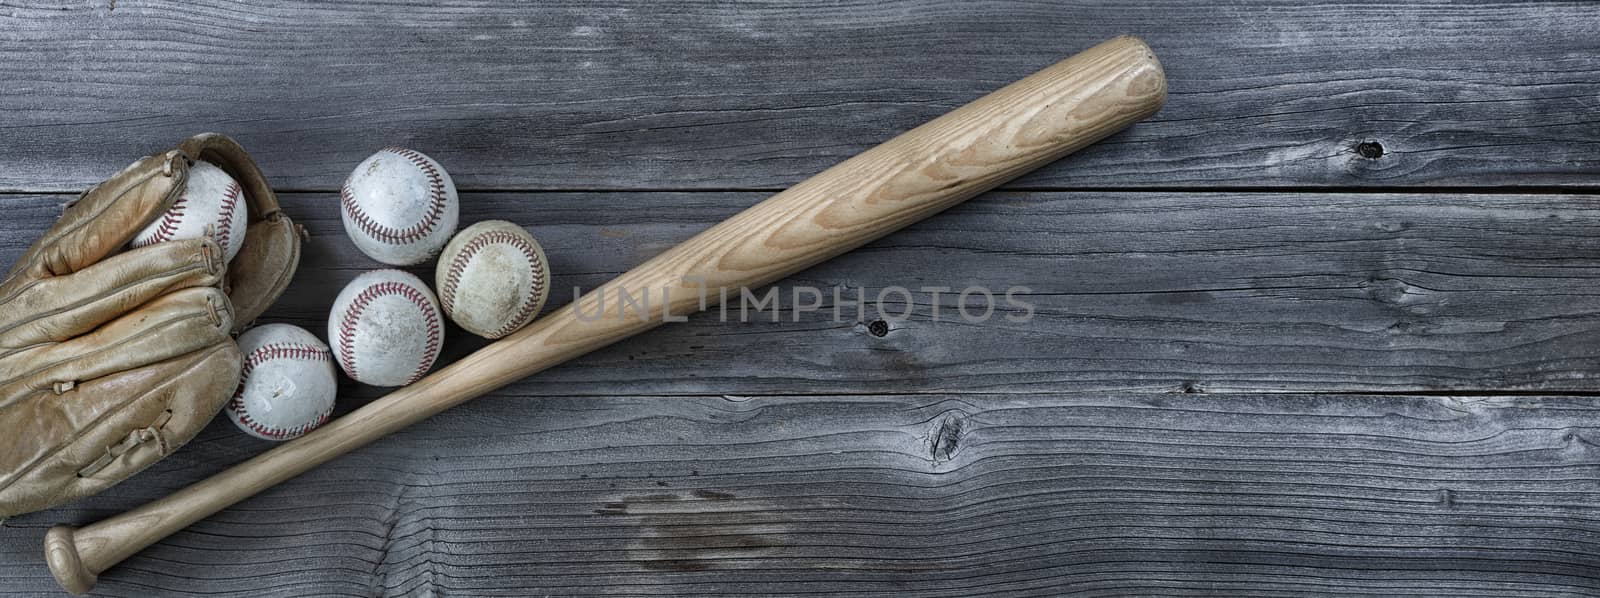 Used baseball equipment on vintage wooden background. Baseball s by tab1962